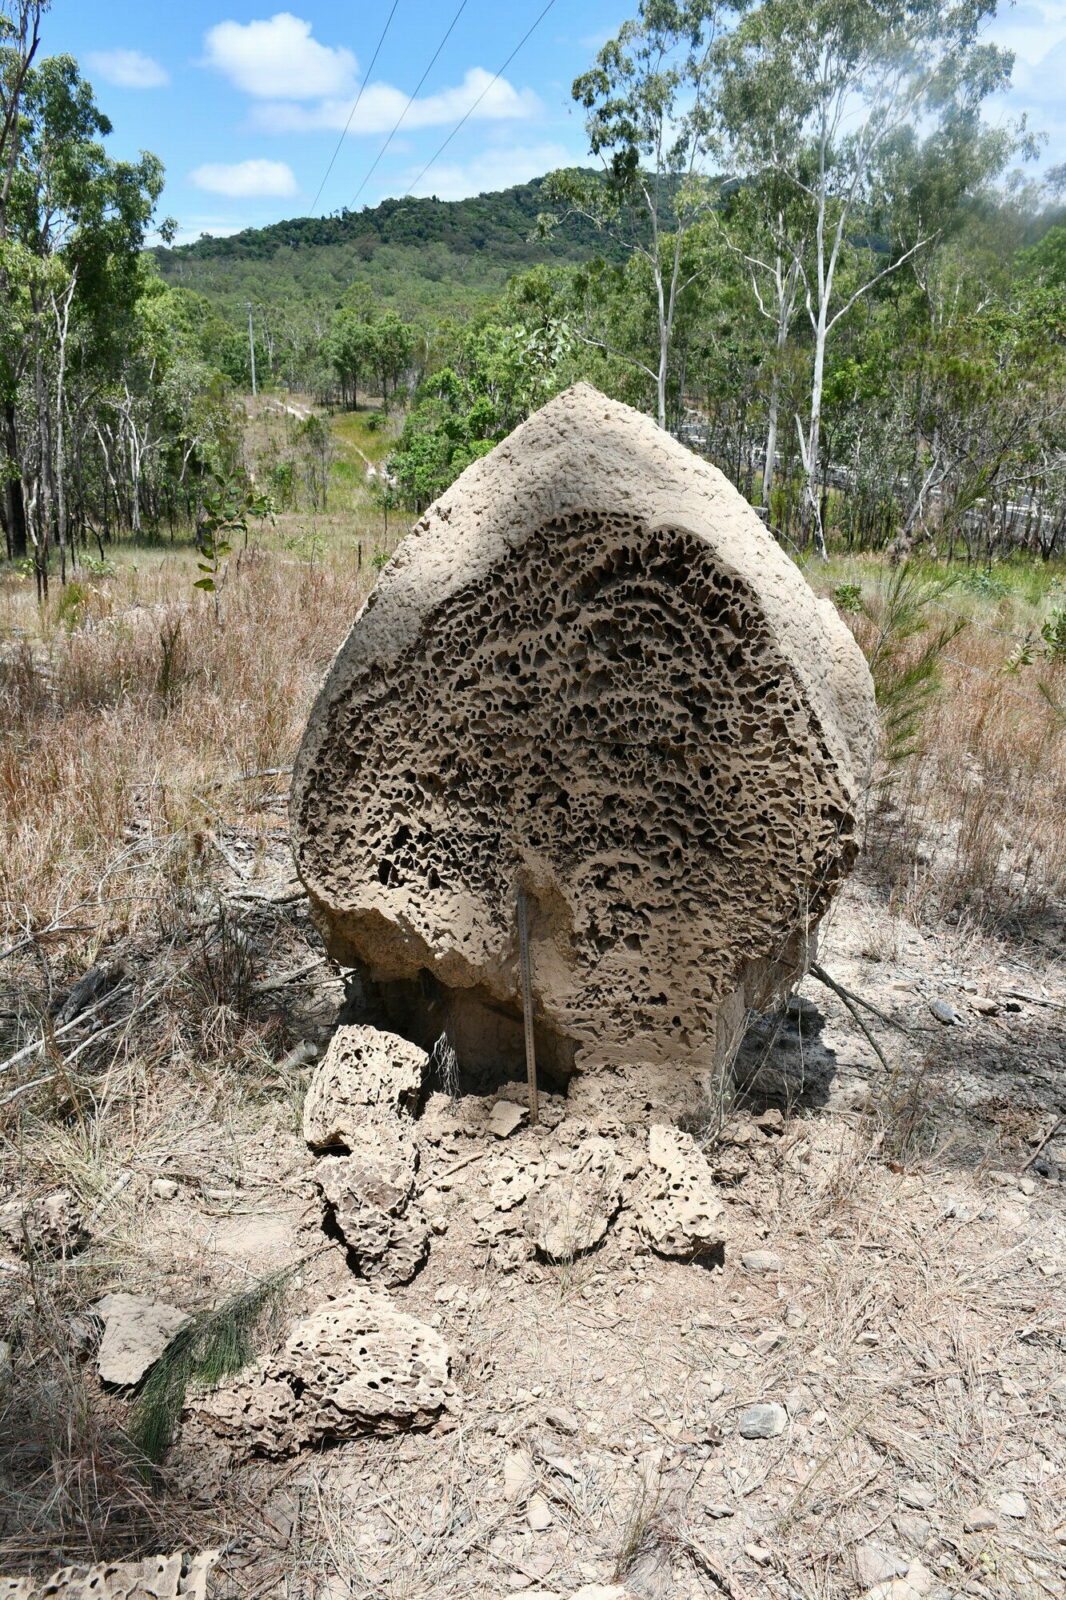 A termite mound, most likely built by the species Nasutitermes magnus, Queensland, Australia. The cut across the nest makes visible the internal structure. It is possible to see what is likely to be the footprint of multiple expansion events. Mound M23. Photo Andrea Perna [CC BY-SA 3.0]